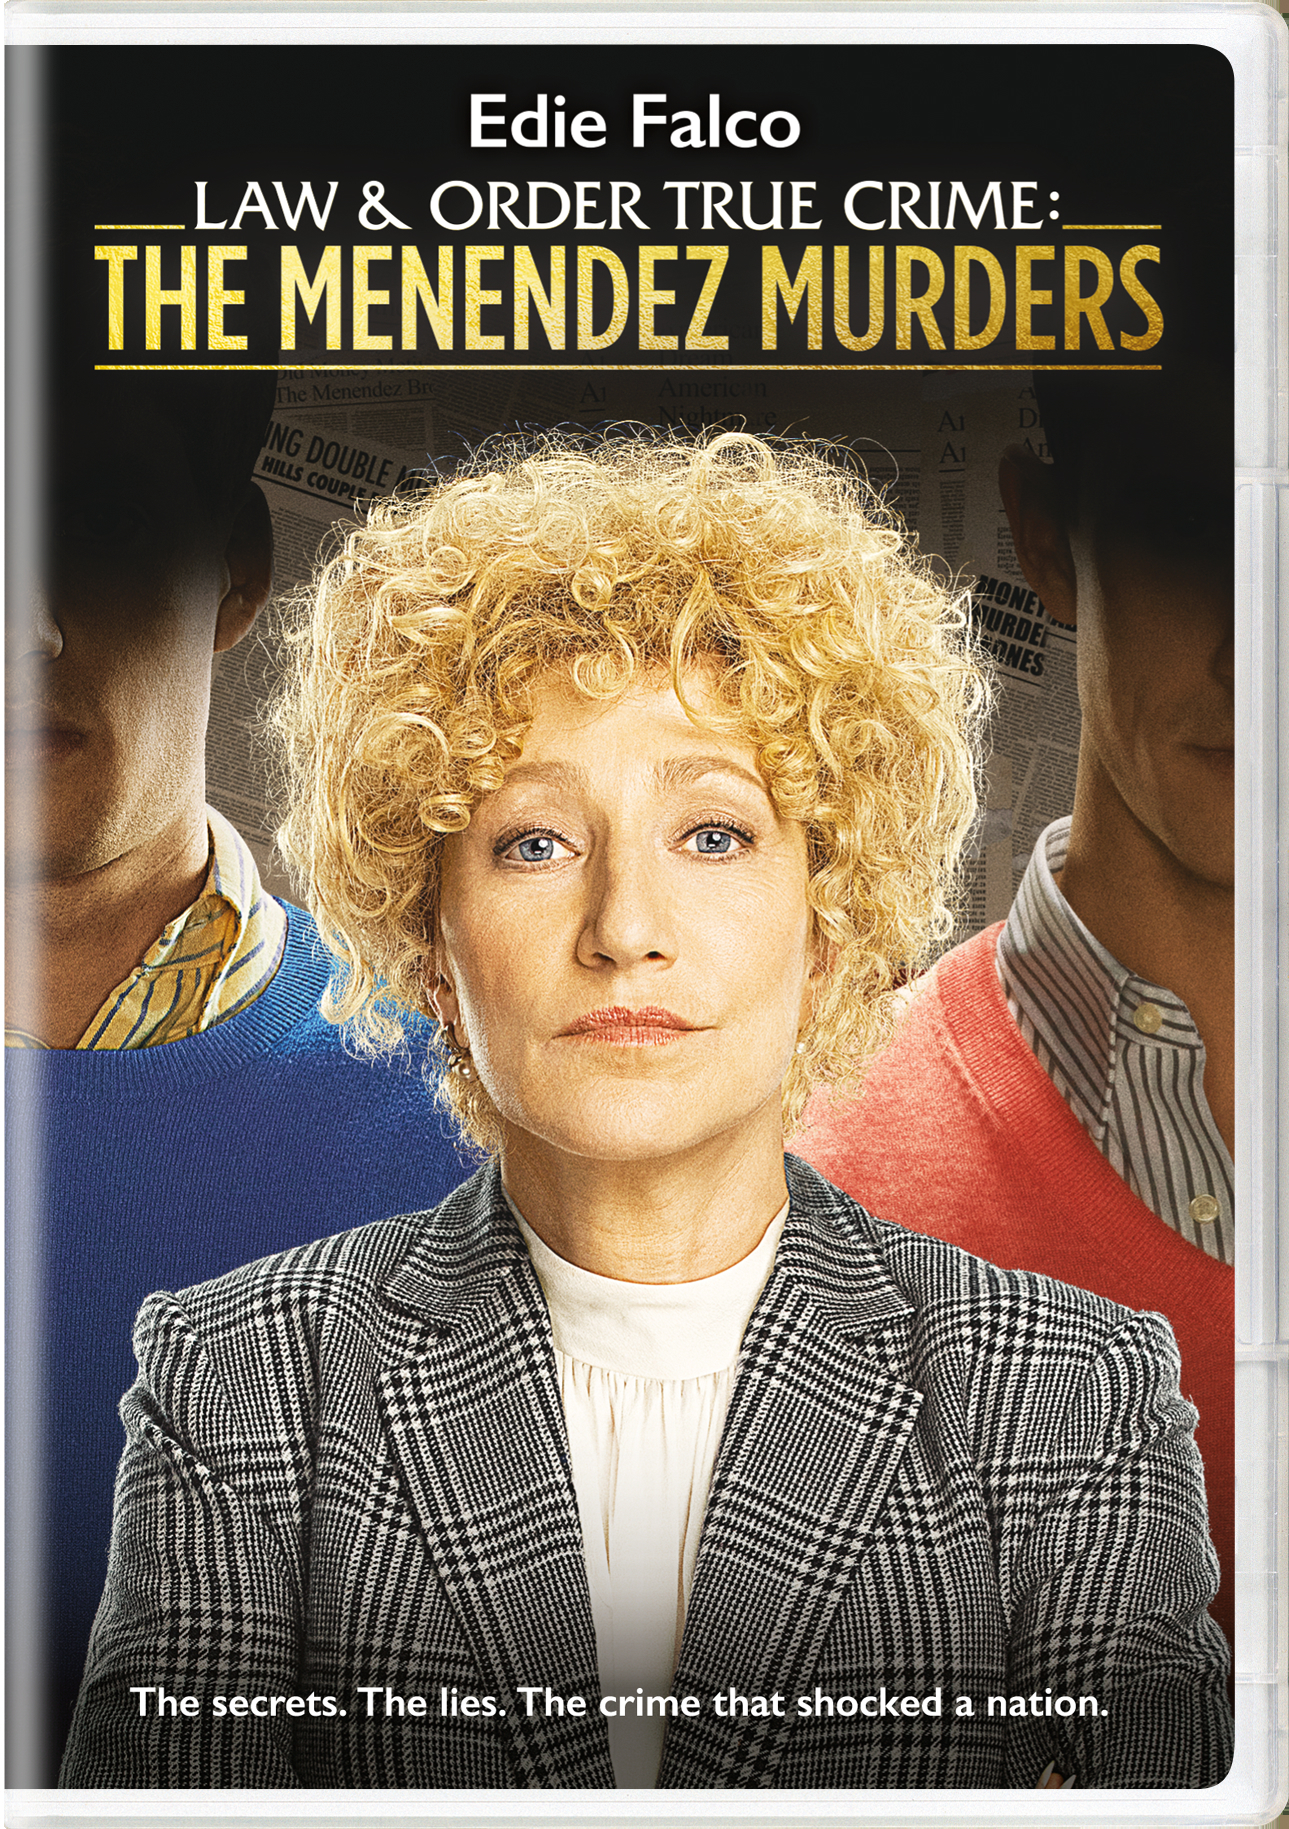 Law & Order: True Crimes - The Menendez Murders - DVD   - Drama Television On DVD - TV Shows On GRUV